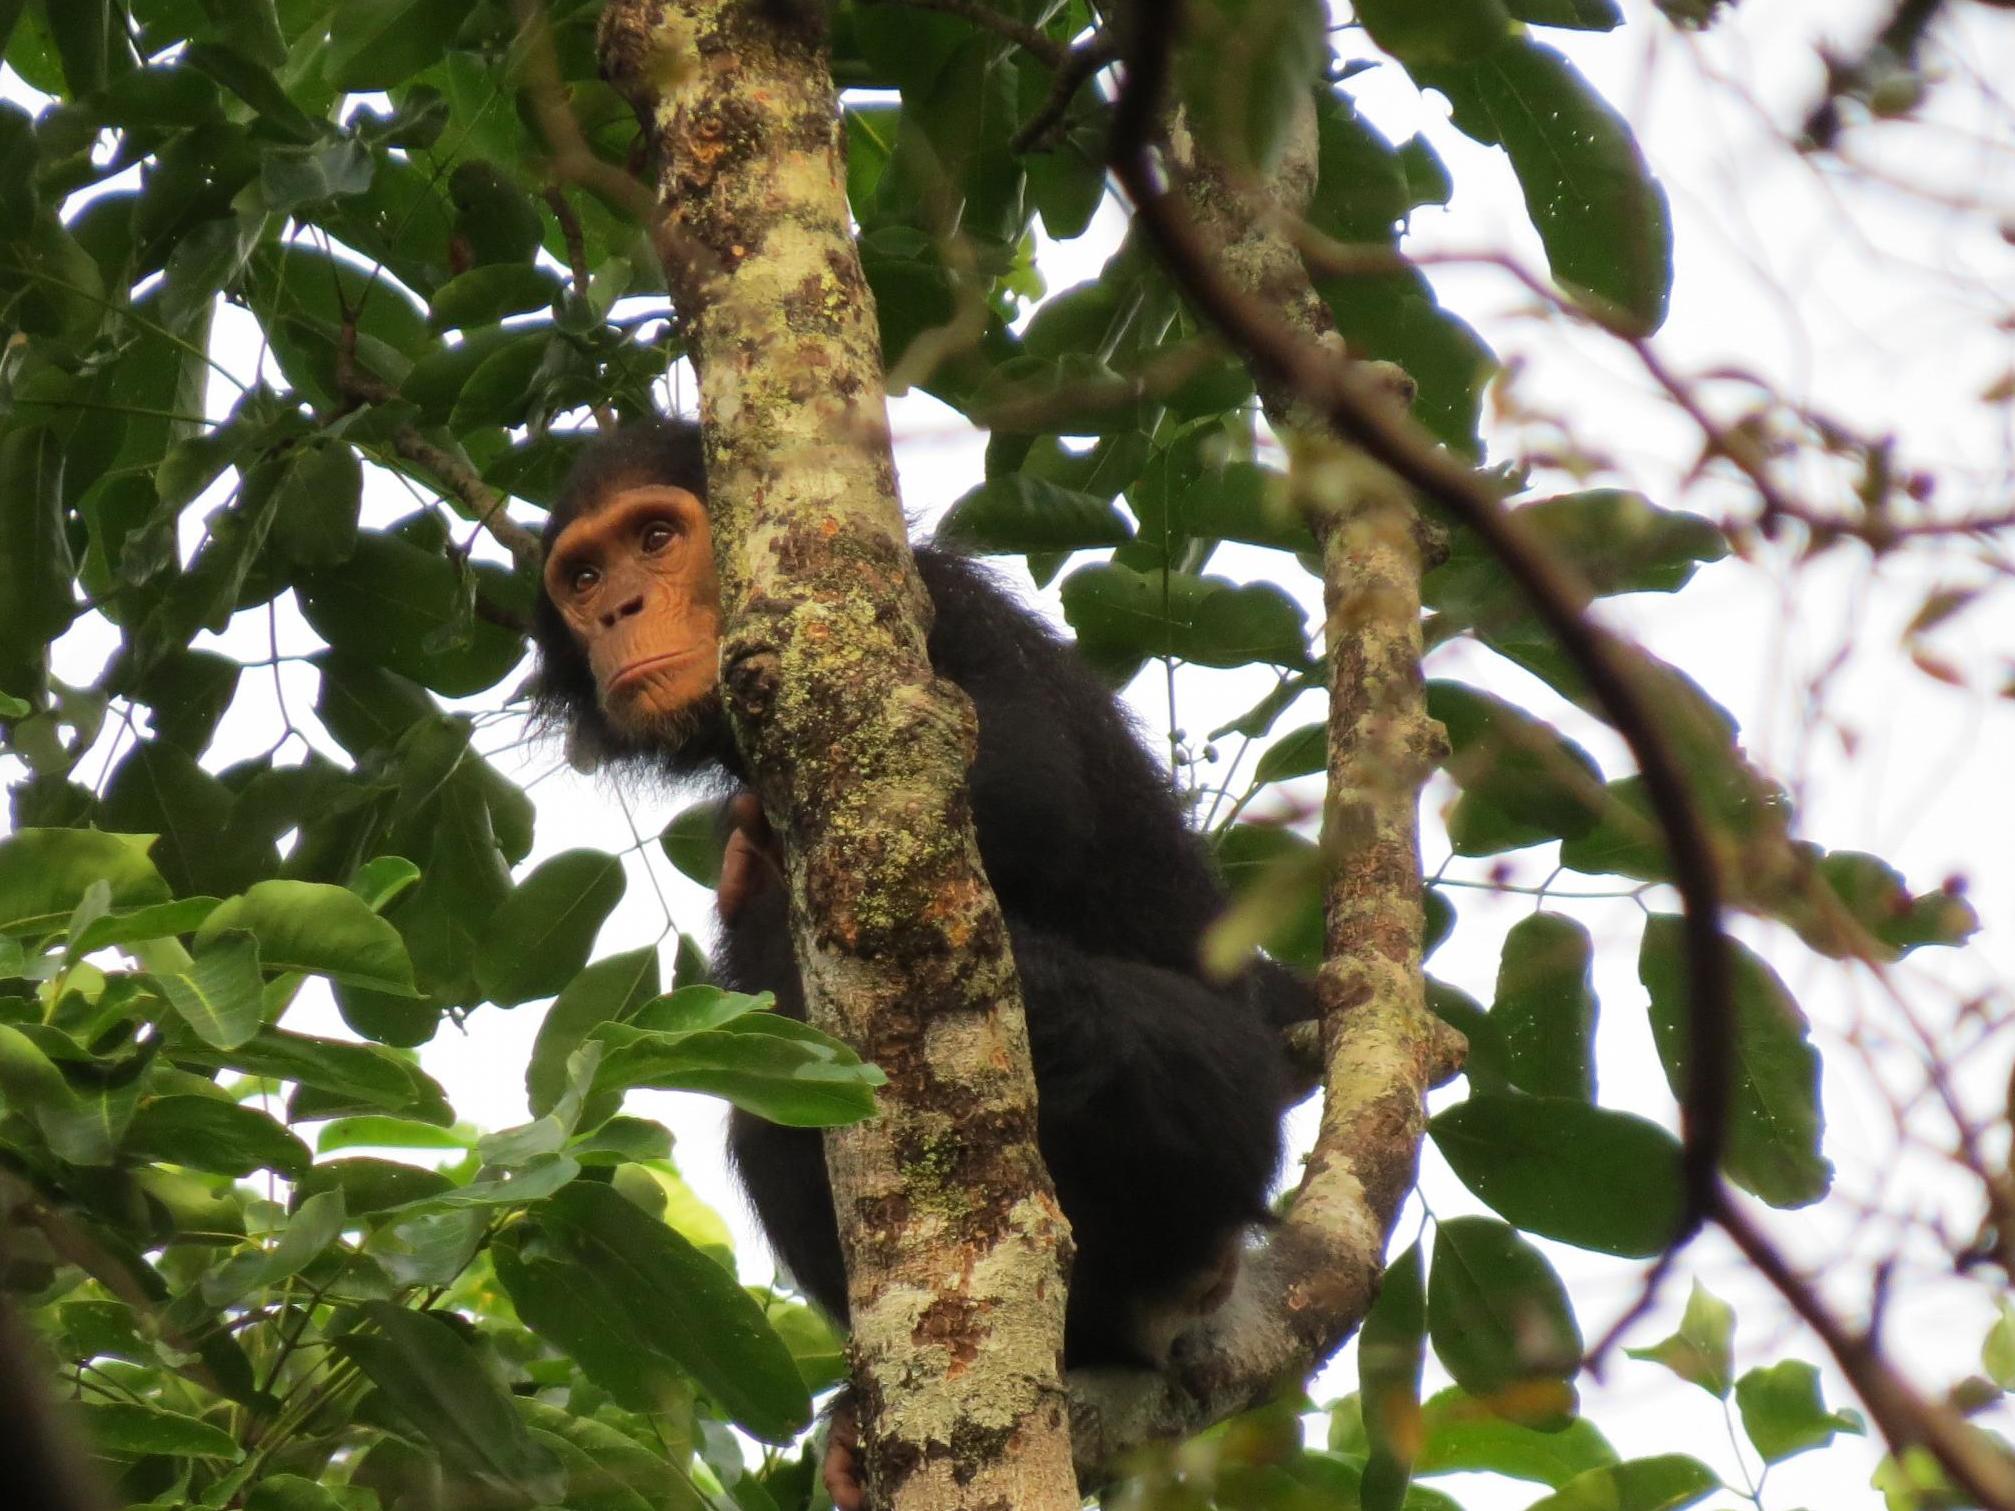 Eastern chimpanzee in Chinko Nature Reserve in the Central African Republic